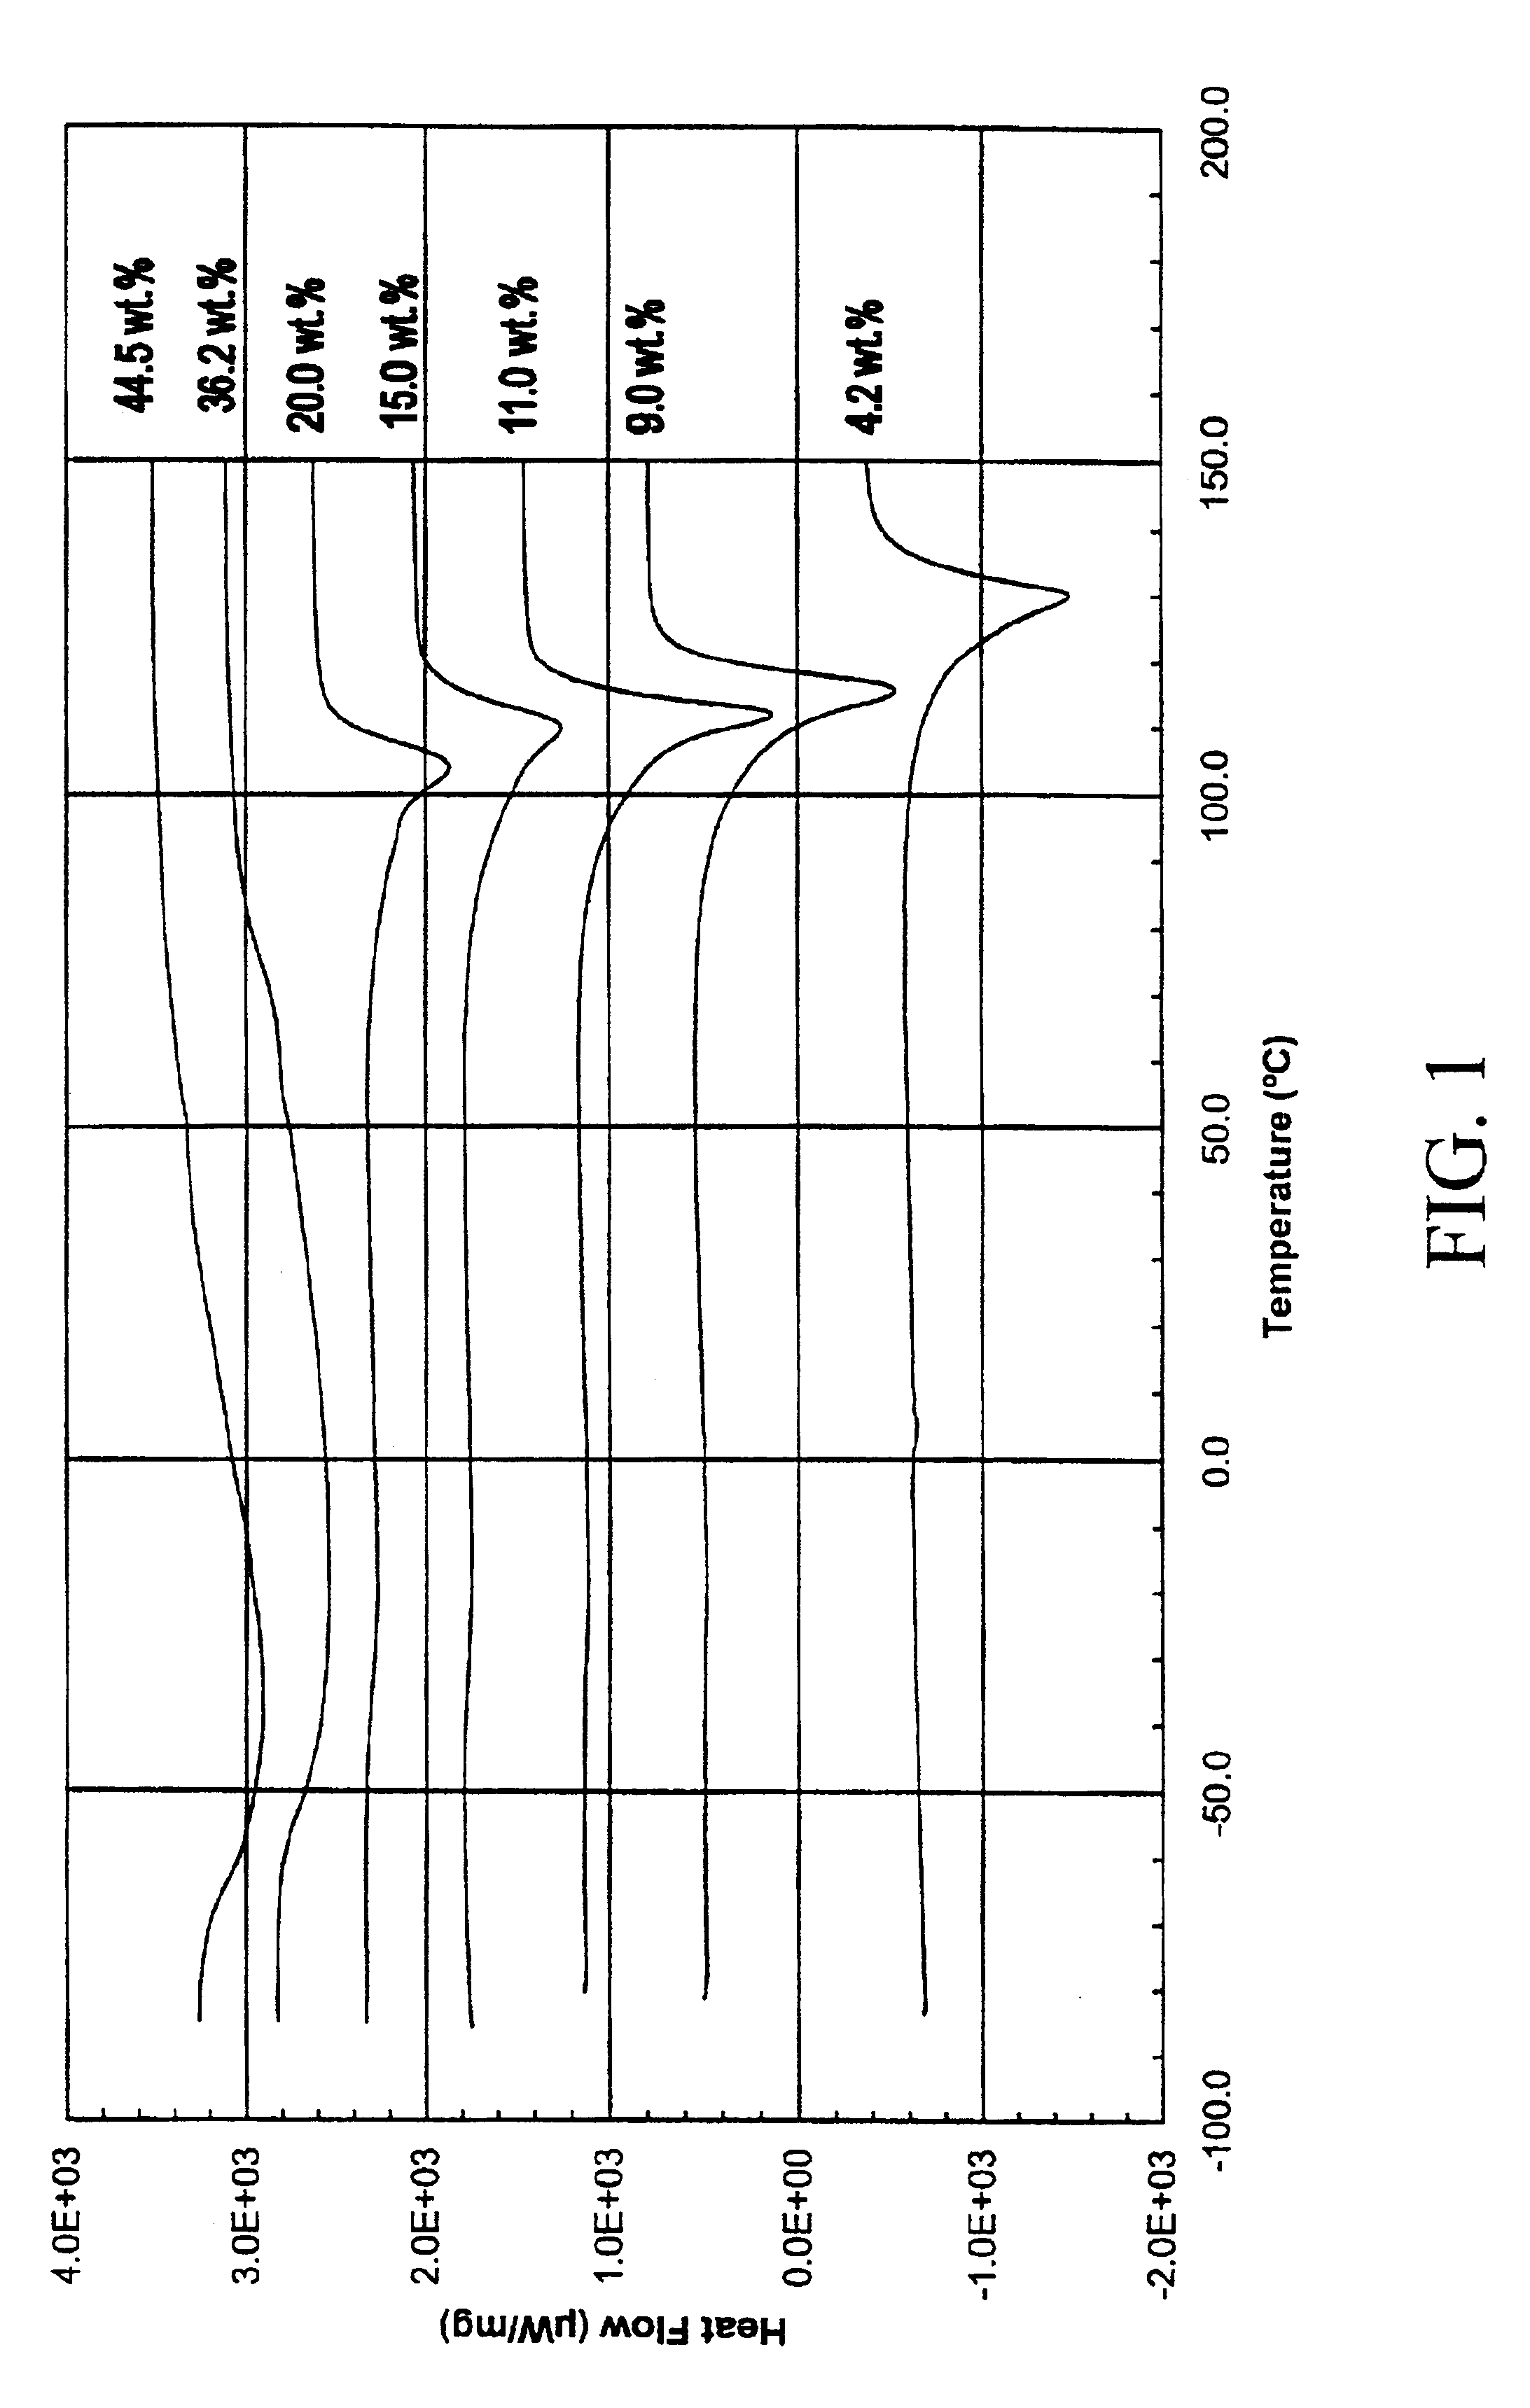 Thermally responsive polymer materials and uses thereof